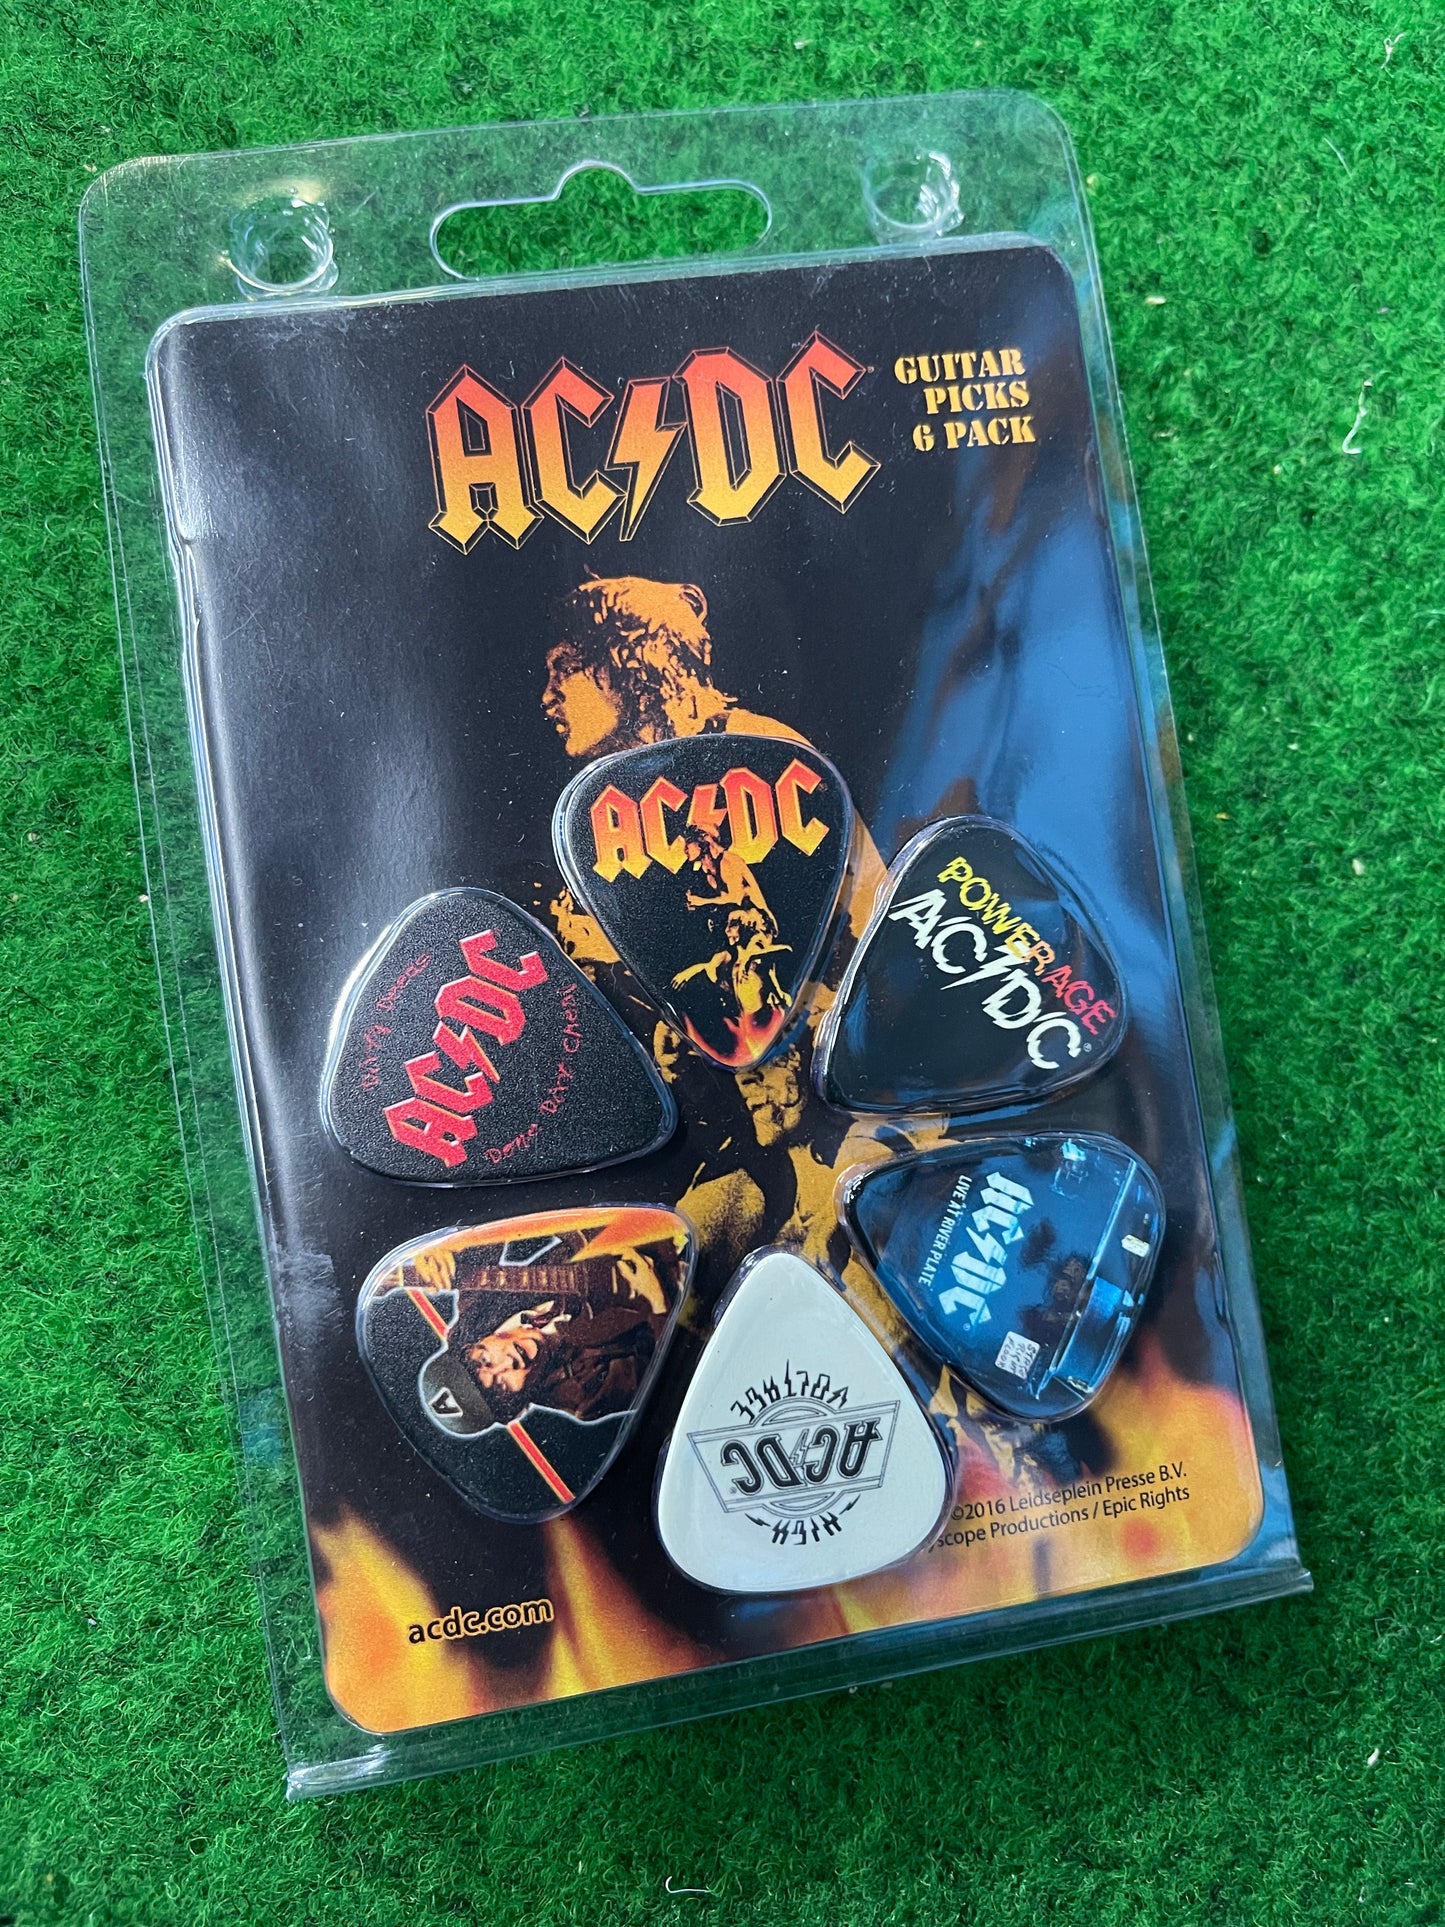 AC/DC Limited Edition Guitar Picks - 6 Pack - 0.71mm